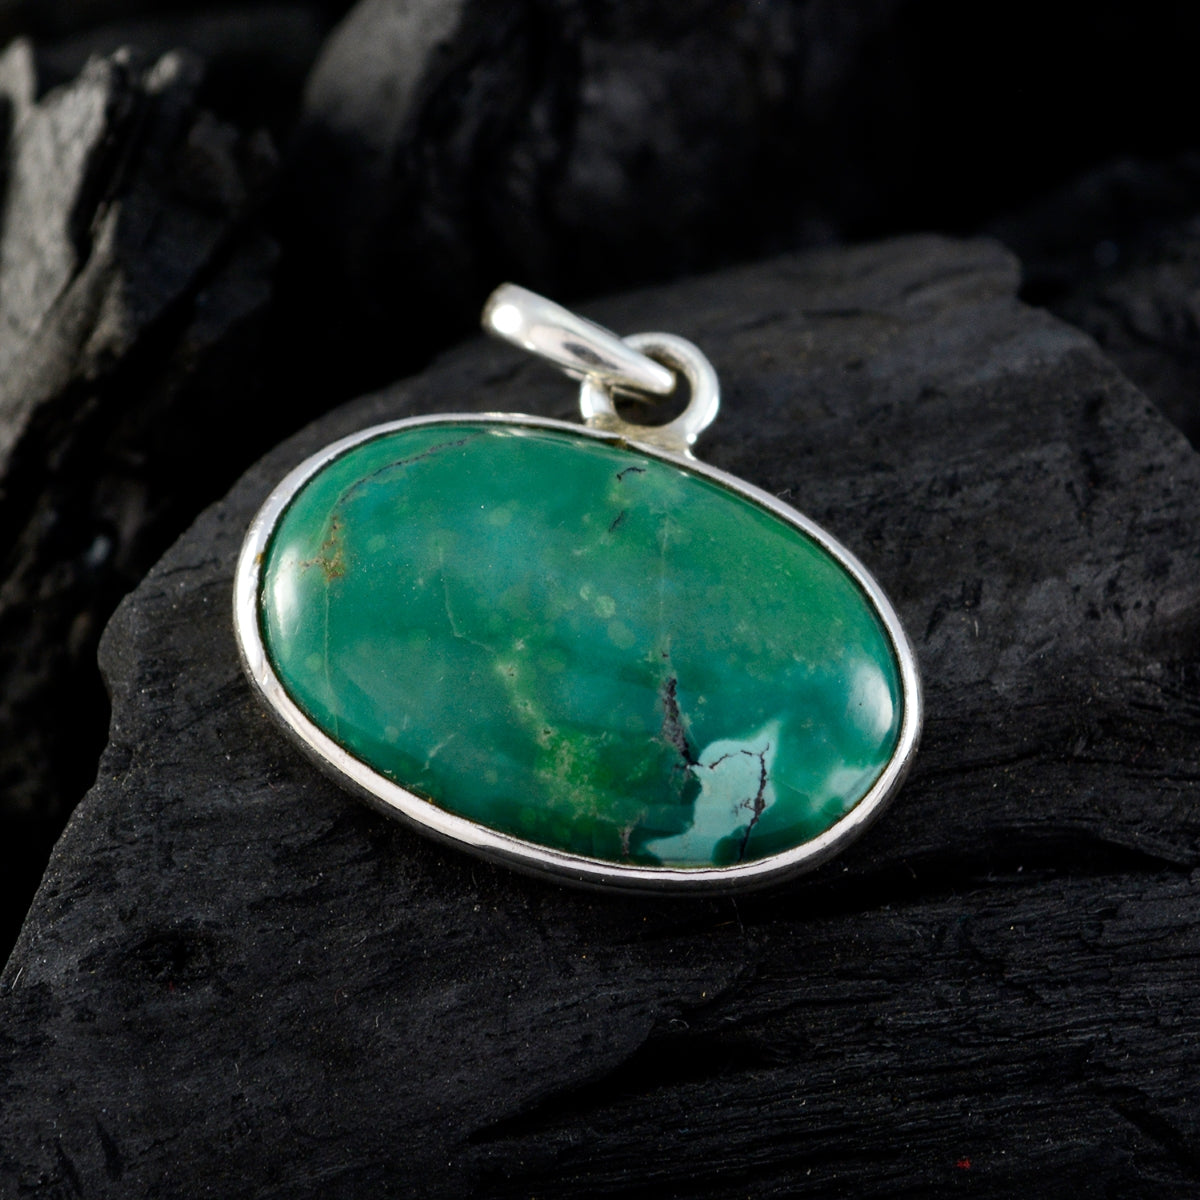 Riyo Nice Gemstone Oval Cabochon Green Turquoise Sterling Silver Pendant gift for wife